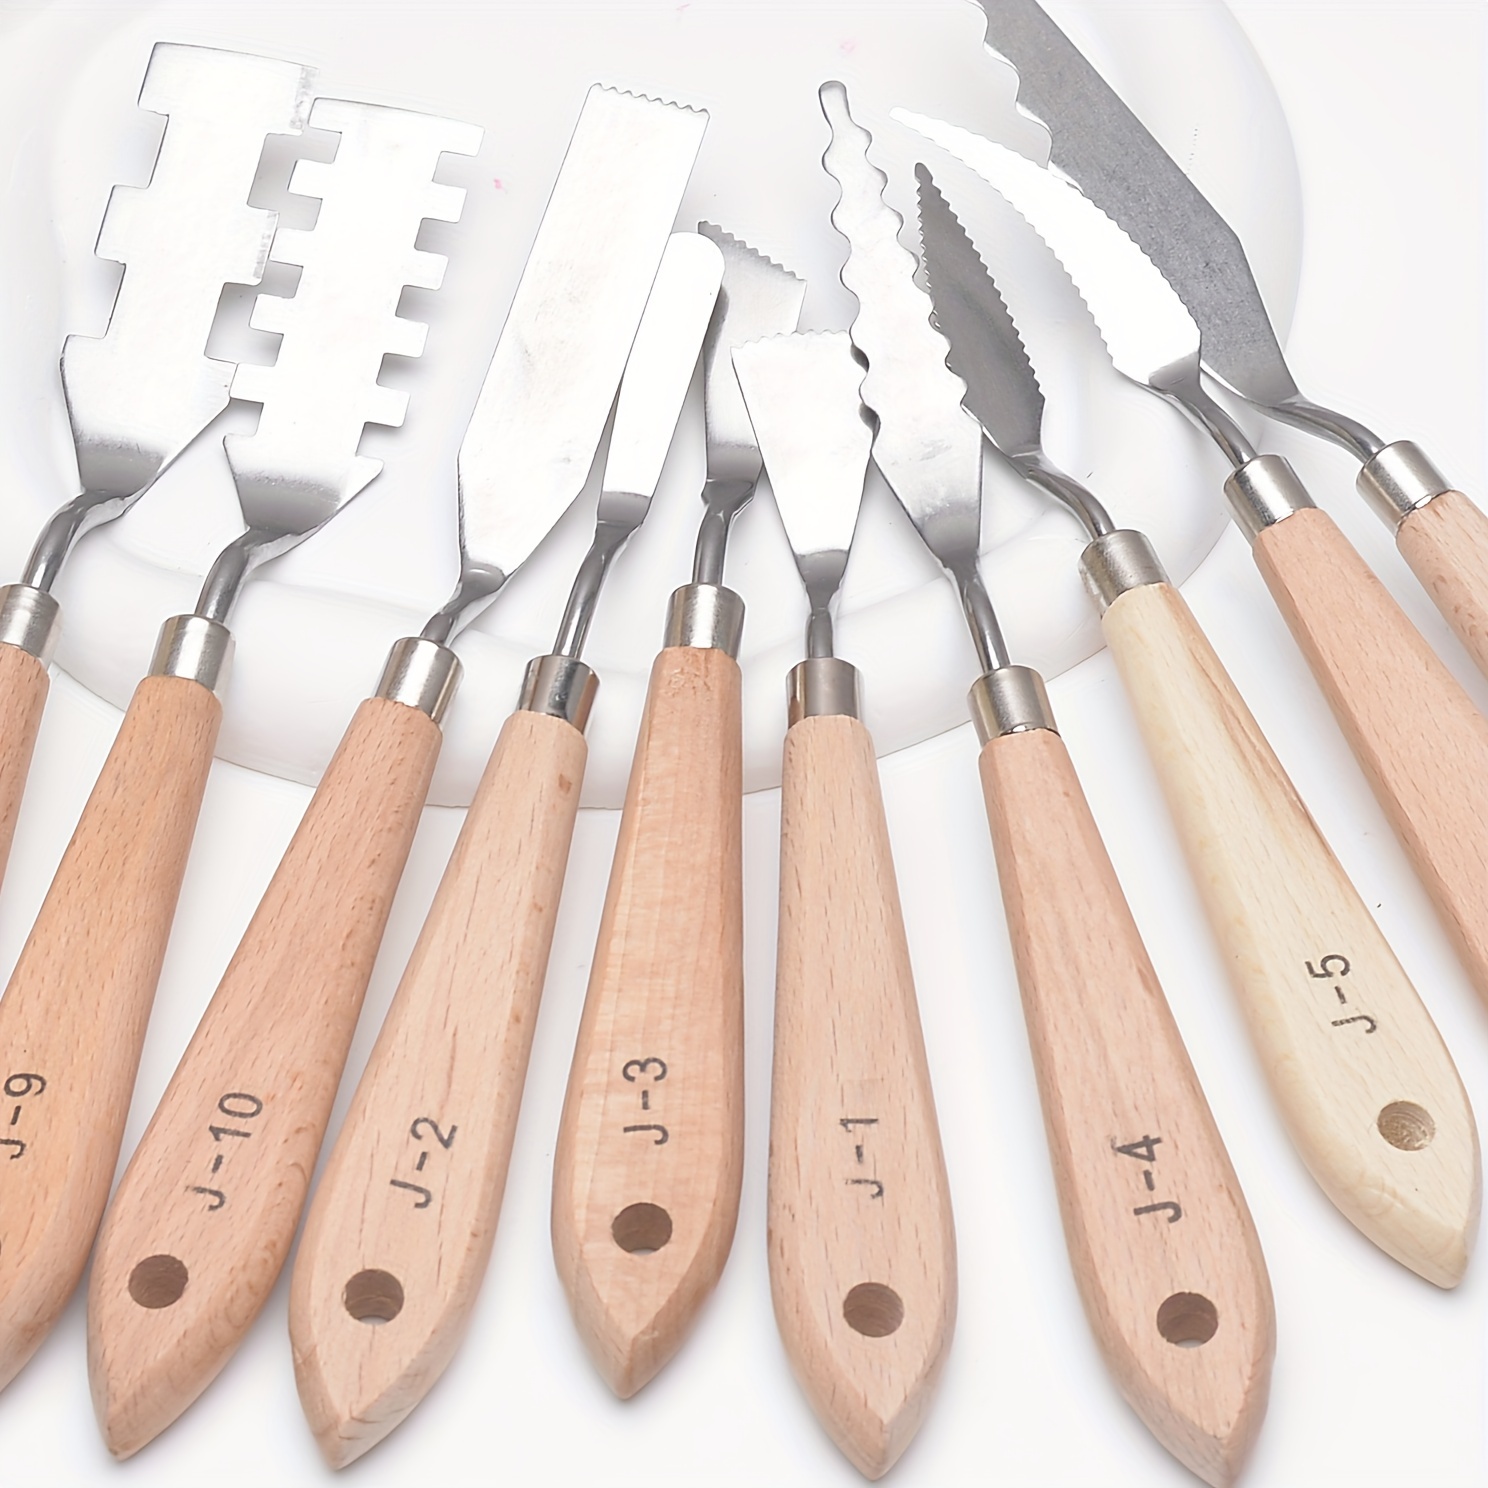 Painting Knife : Set of 9